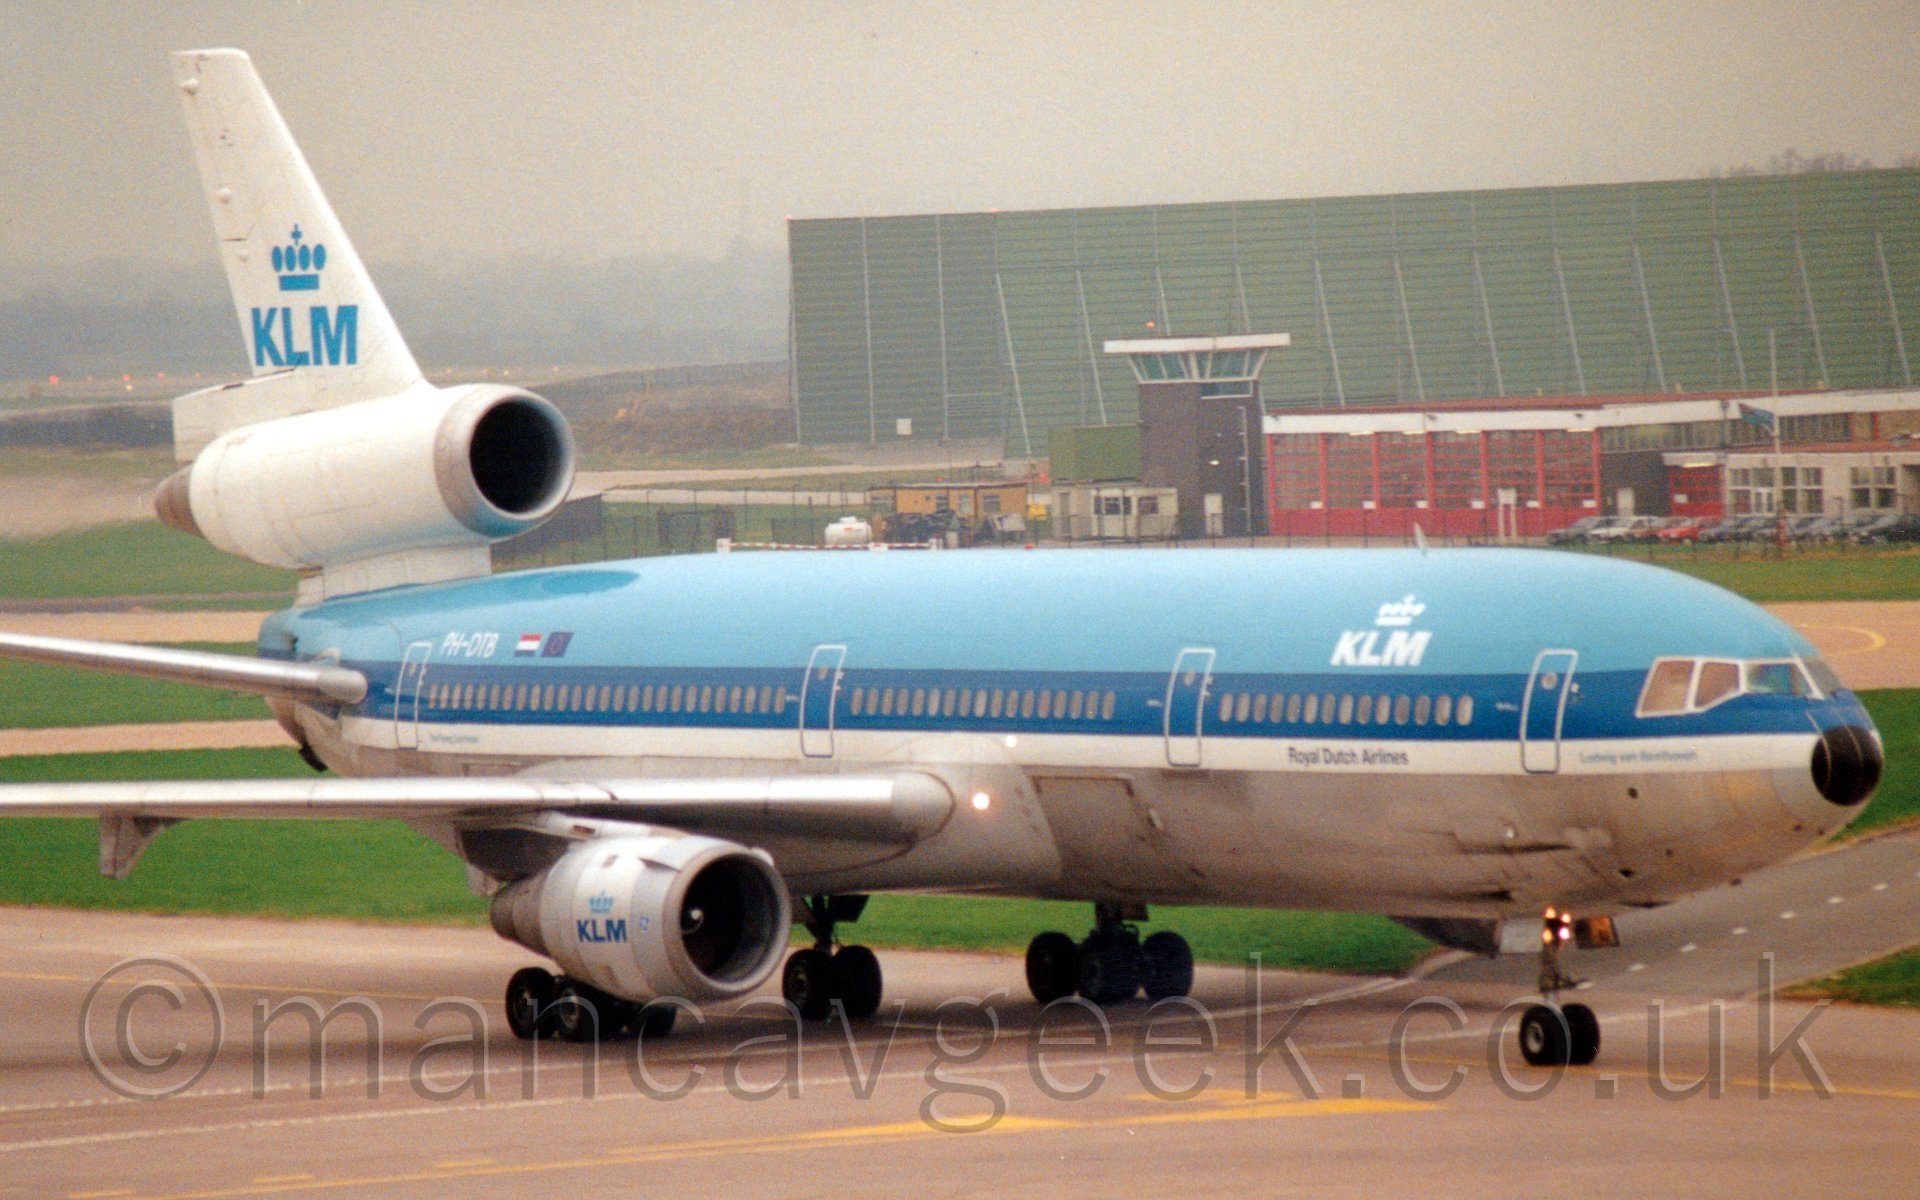 Side view of a 3 engined jet airliner taxiing from left to right. The plane is light blue on the top, with a silver belly, , and a thick darker blue stripe and thinner white stripe in the middle. There are white "KLM" titles under a stylised white crown on the forwar fuselage, with a similar, larger blue crown over blue "KLM" titles on the tail, as ell as on the white engine pods. Behind, there is a low brown building with red-framed doors and windows, with a short brown tower with glazed section on the roof, behind which is latrge green metal structure. Above it all, the sky is a depressingly dreary grey.